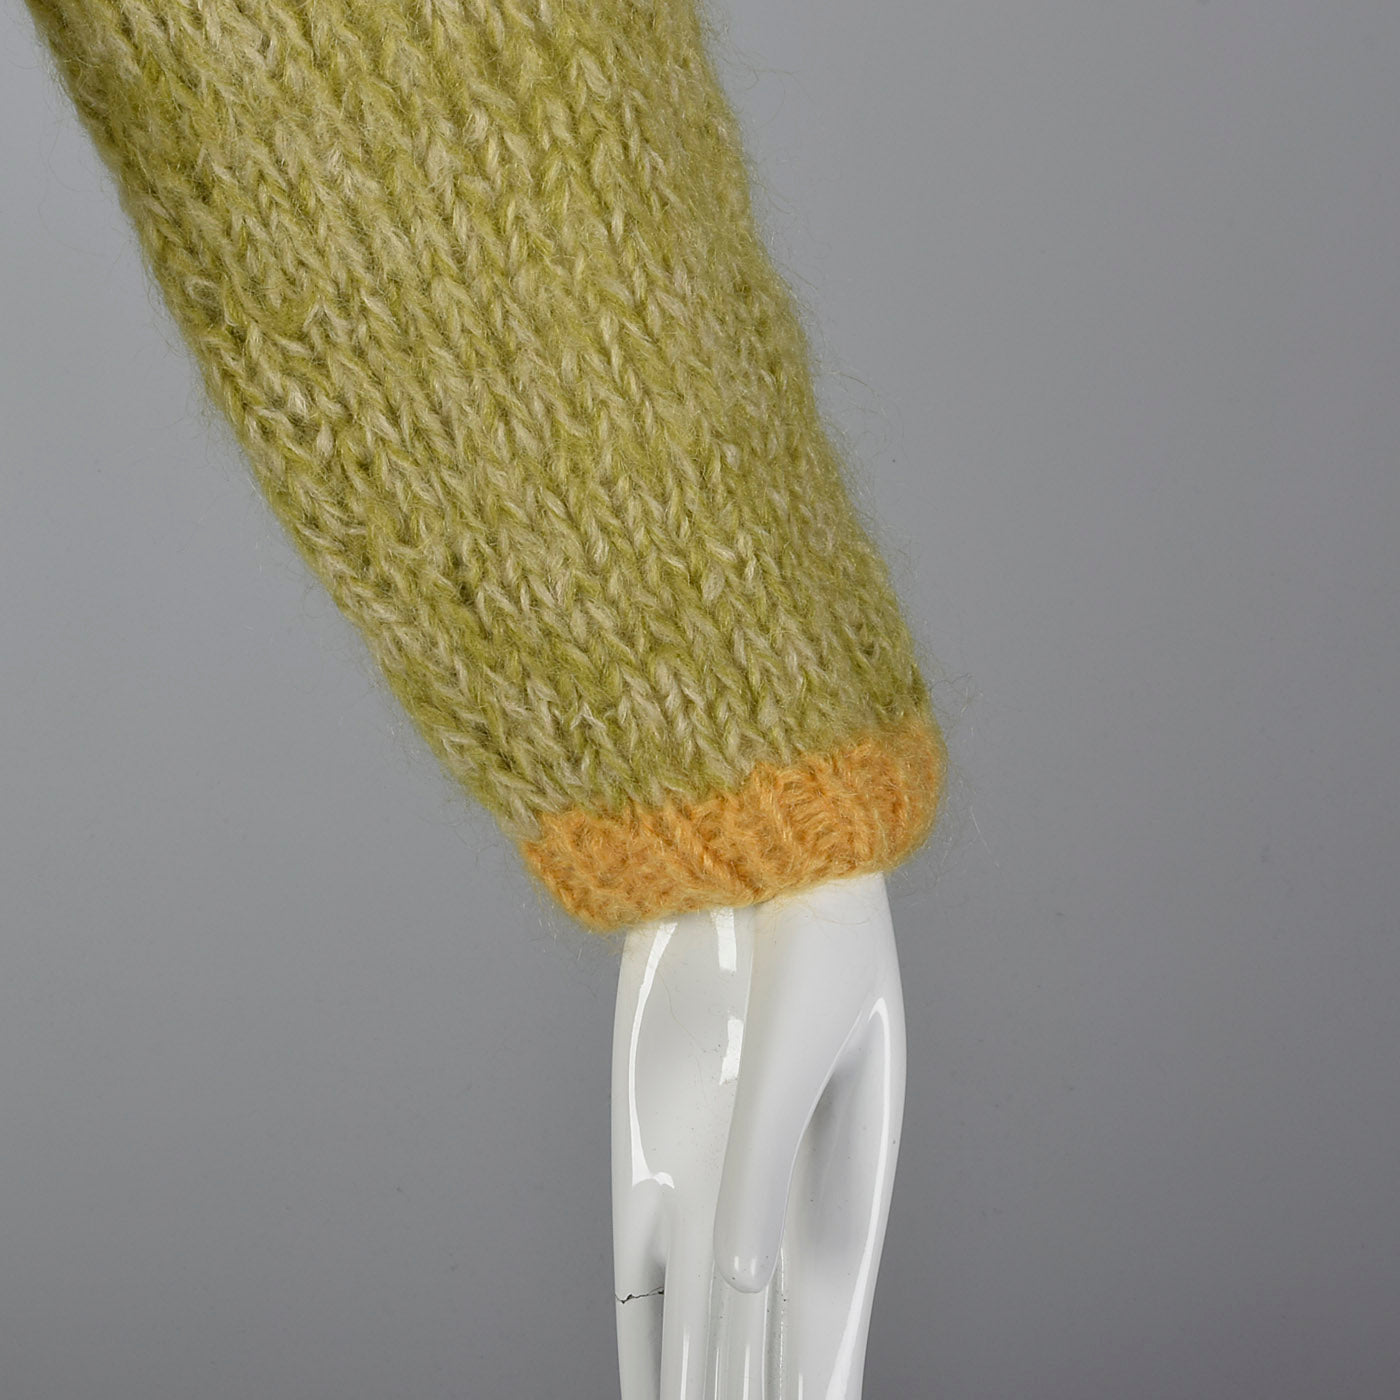 1950s Green Mohair Cardigan with Yellow Trim